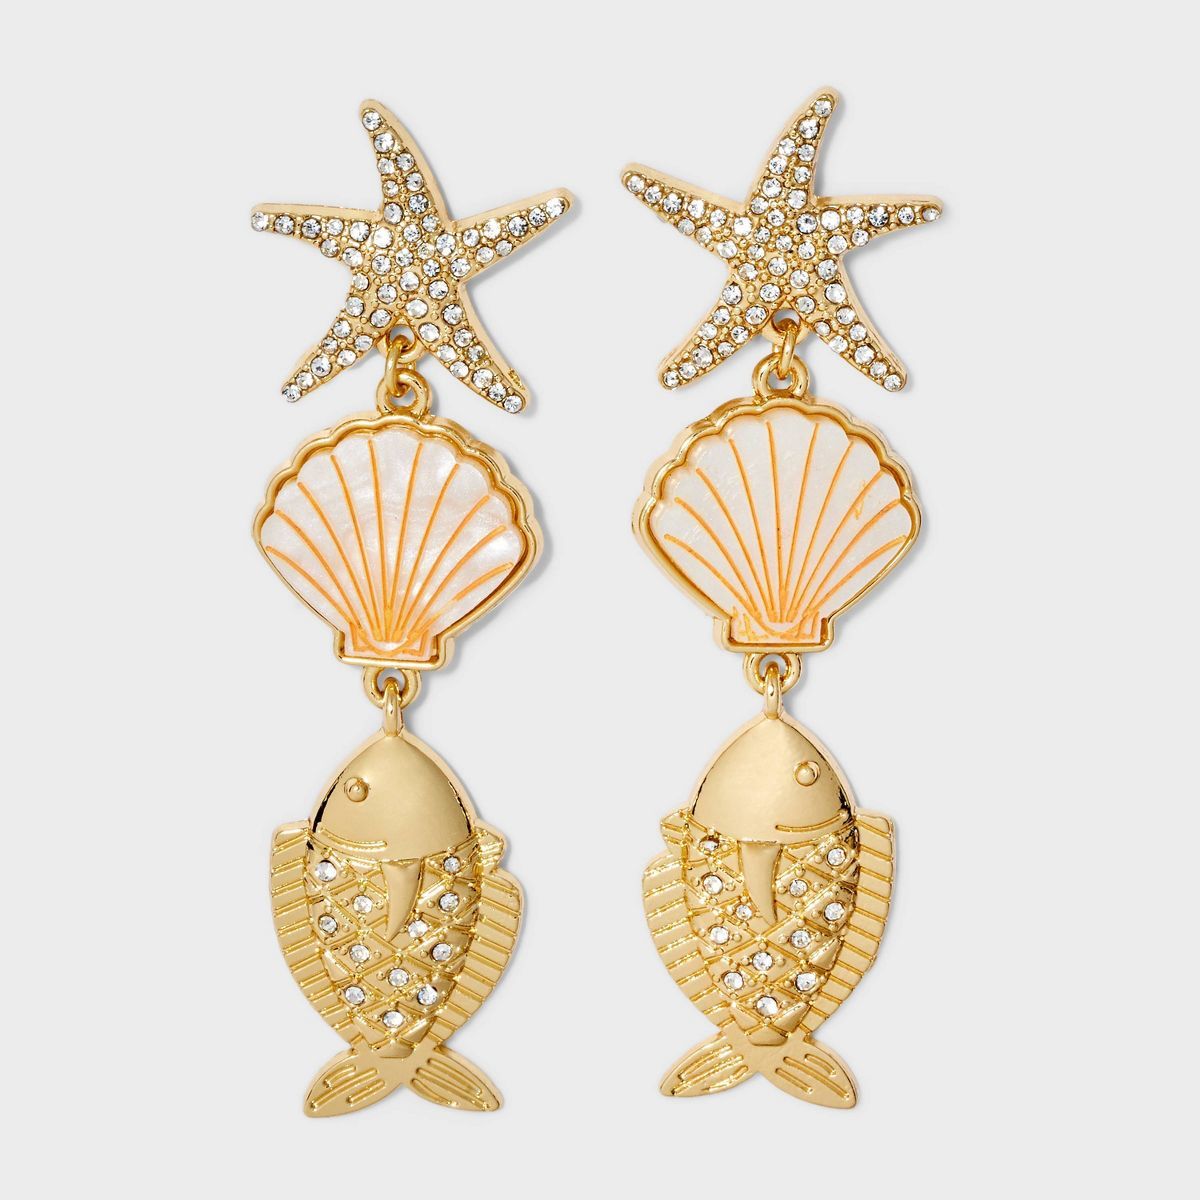 SUGARFIX by BaubleBar Give Them Shell Earrings | Target